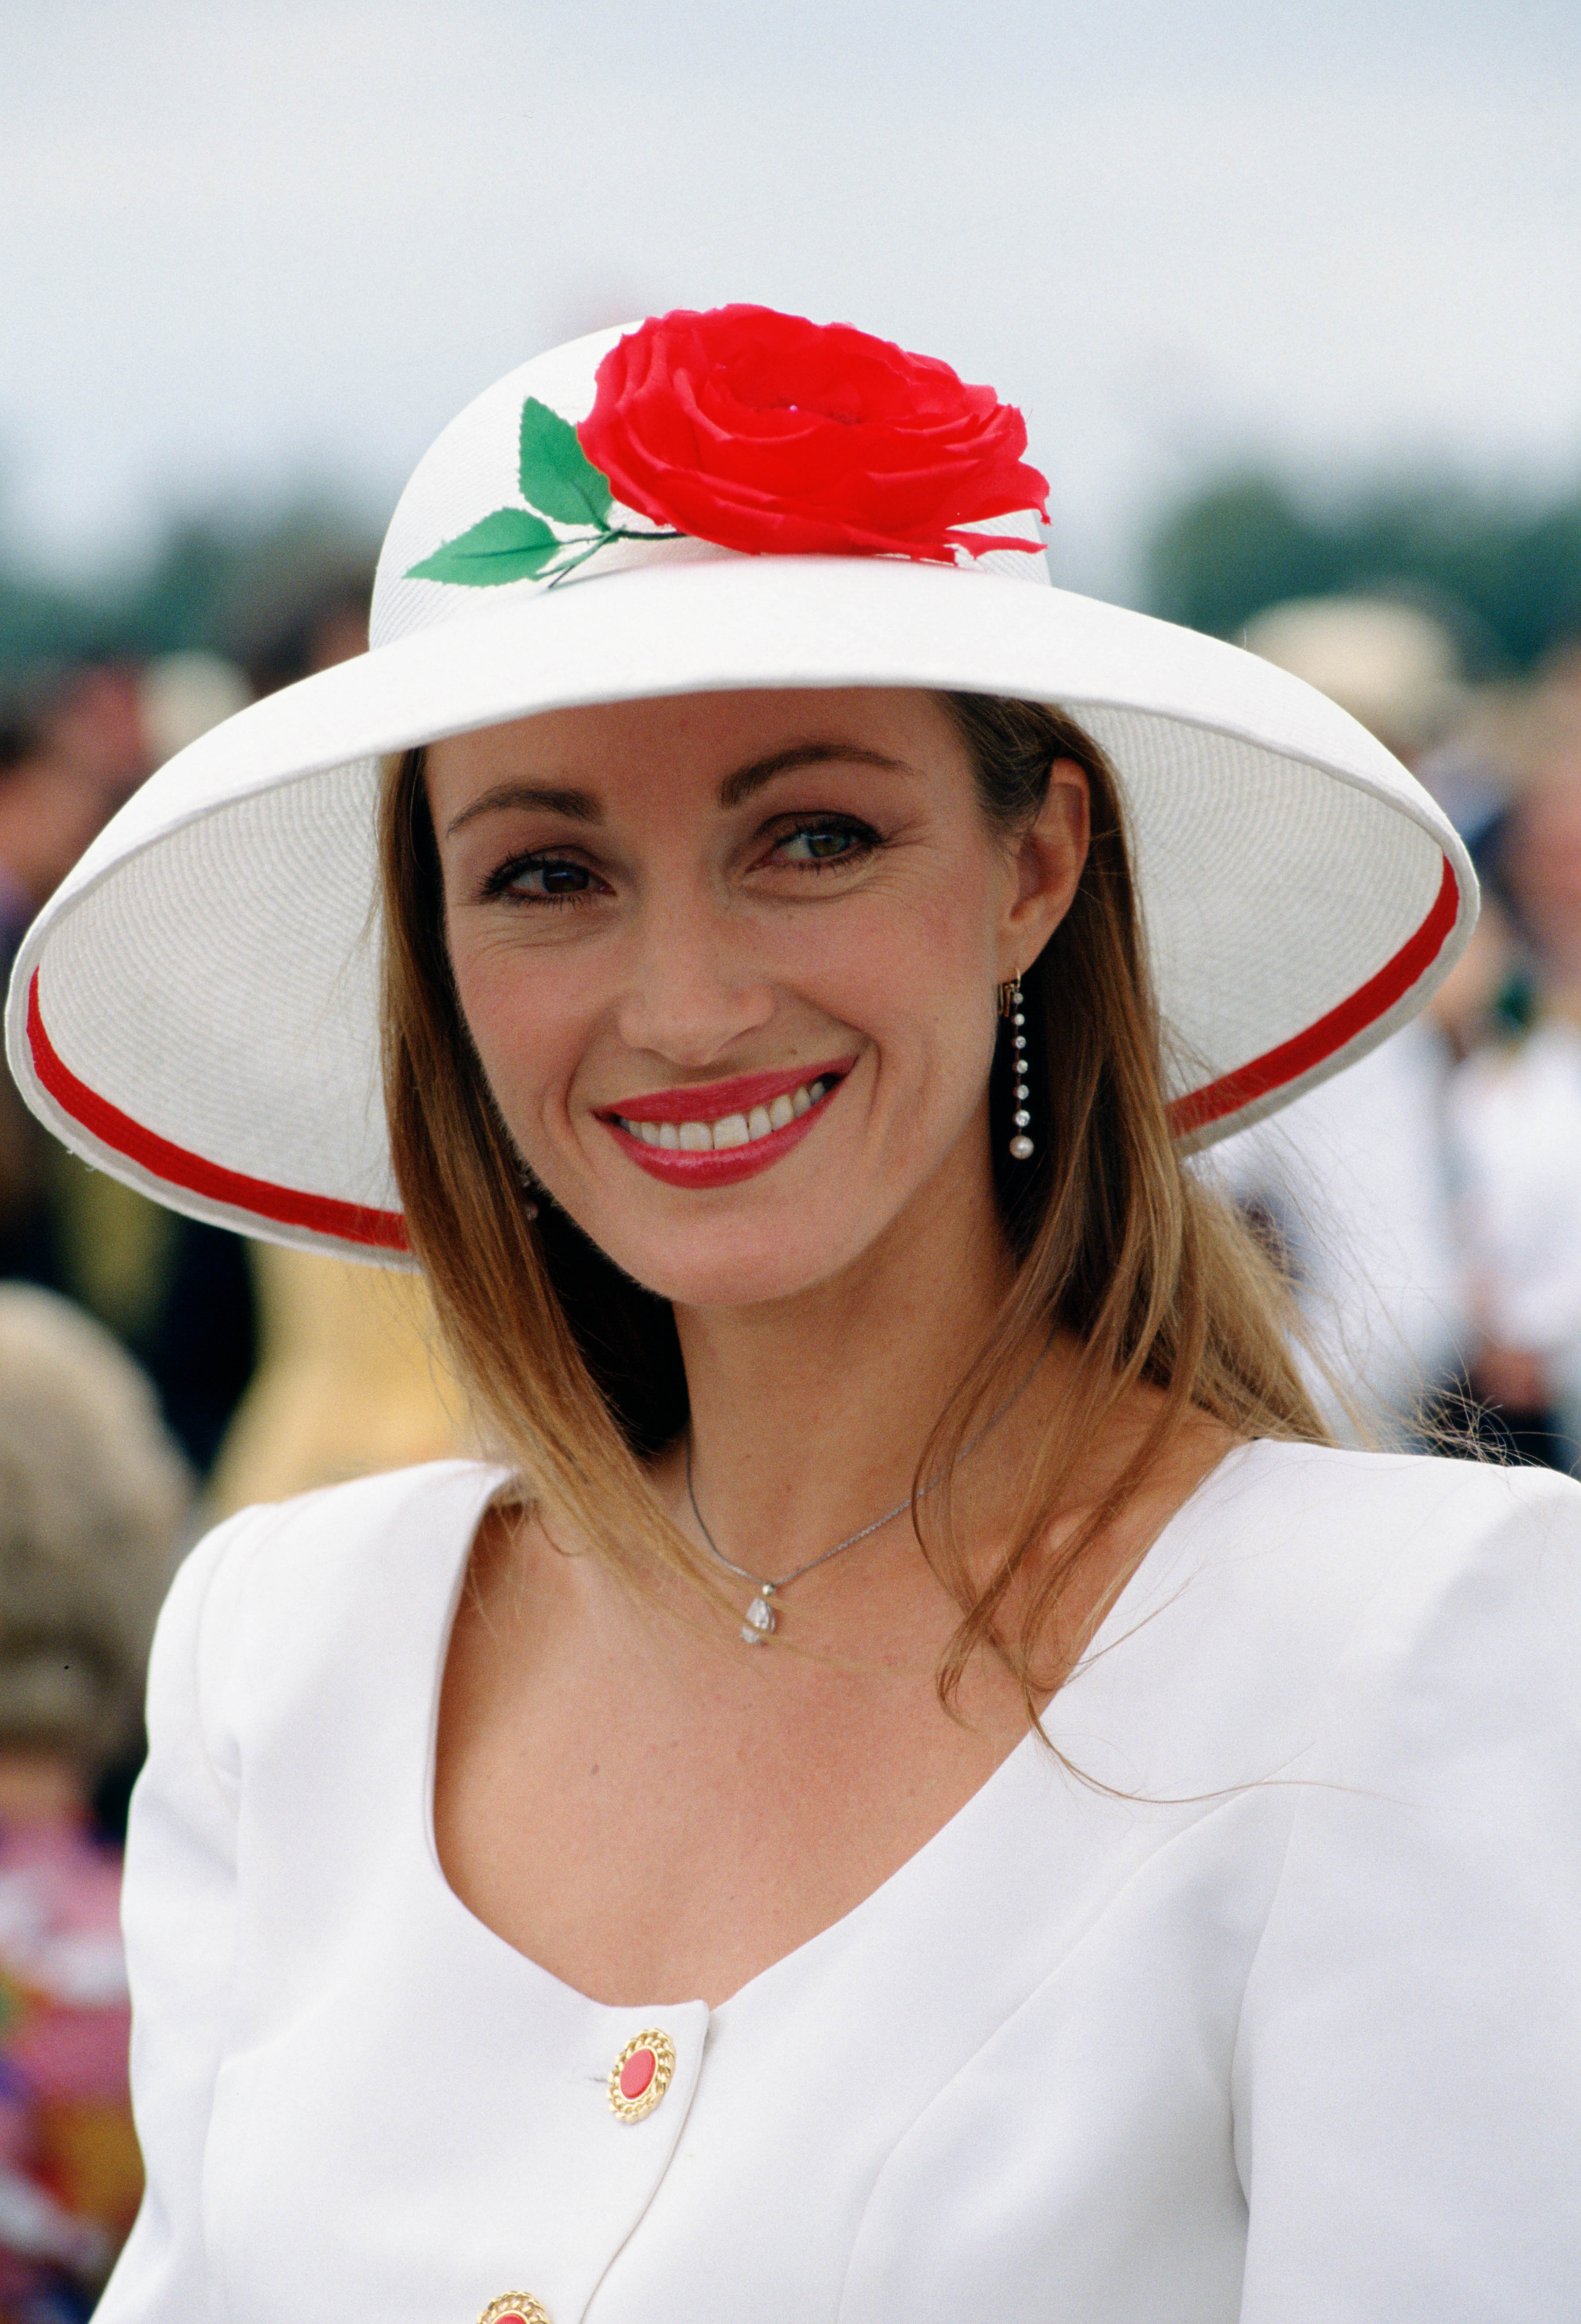 Jane Seymour at Cartier Polo Day, Windsor, Berkshire, UK July 29, 1990 | Photo: GettyImages